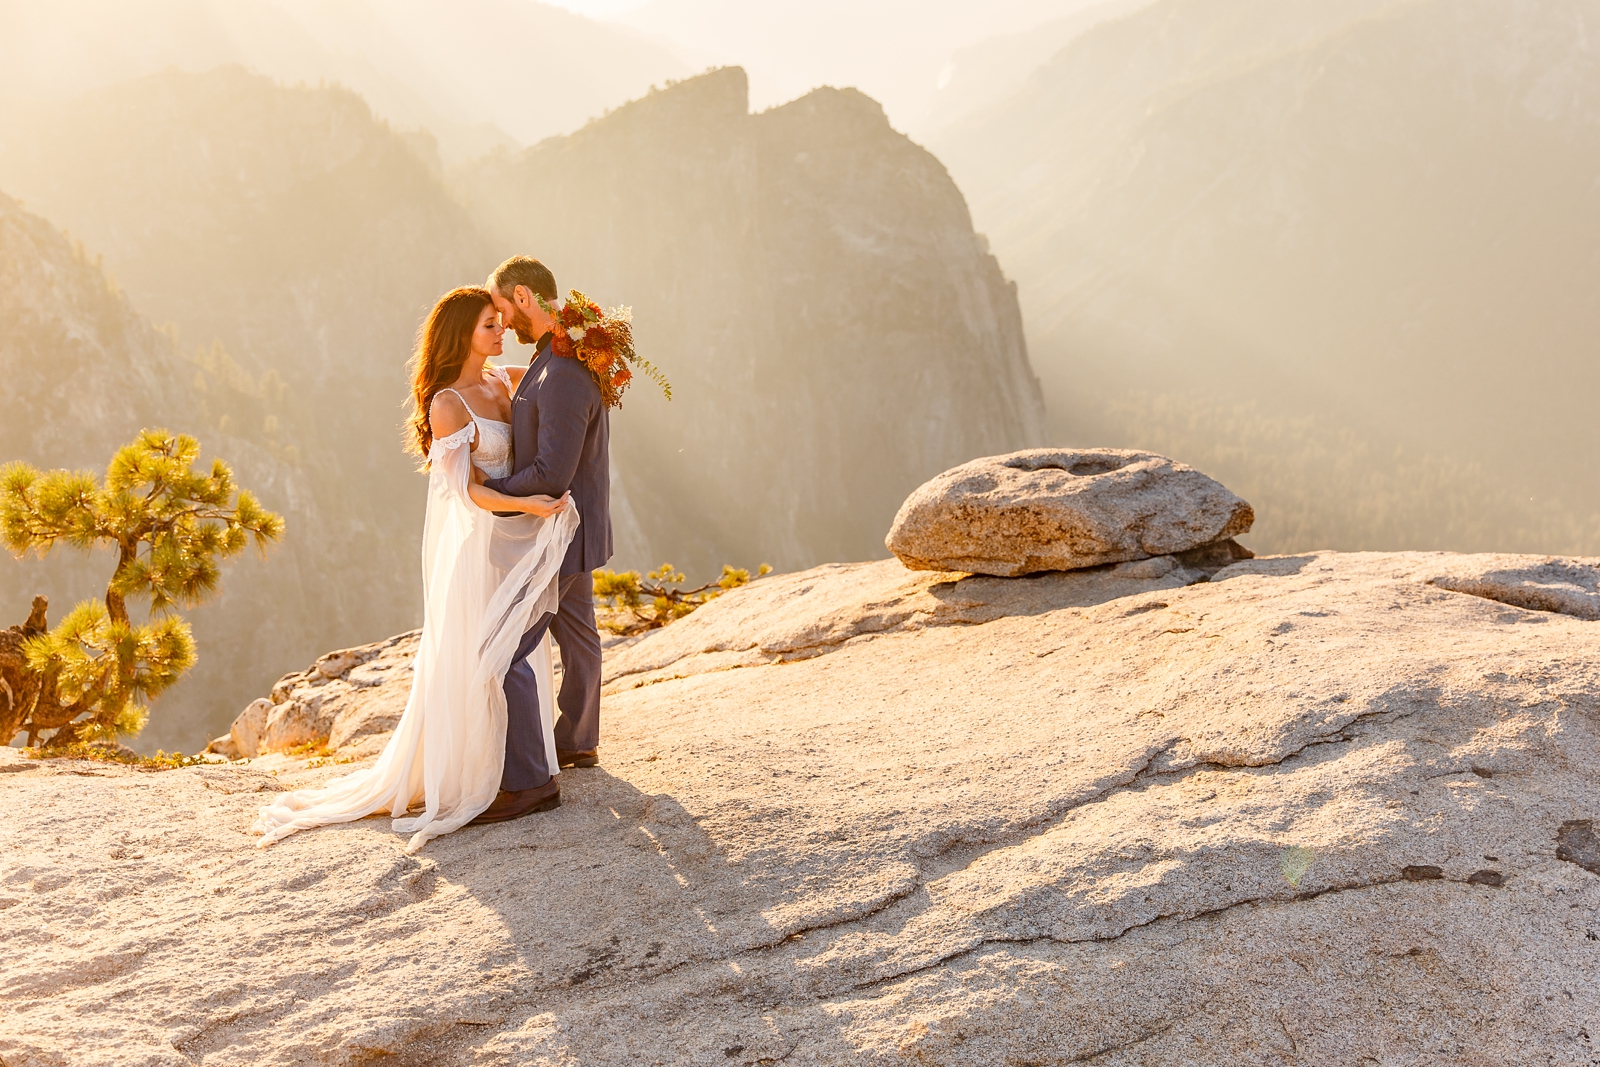 Intimate cuddles at this couple's golden hour Yosemite elopement.